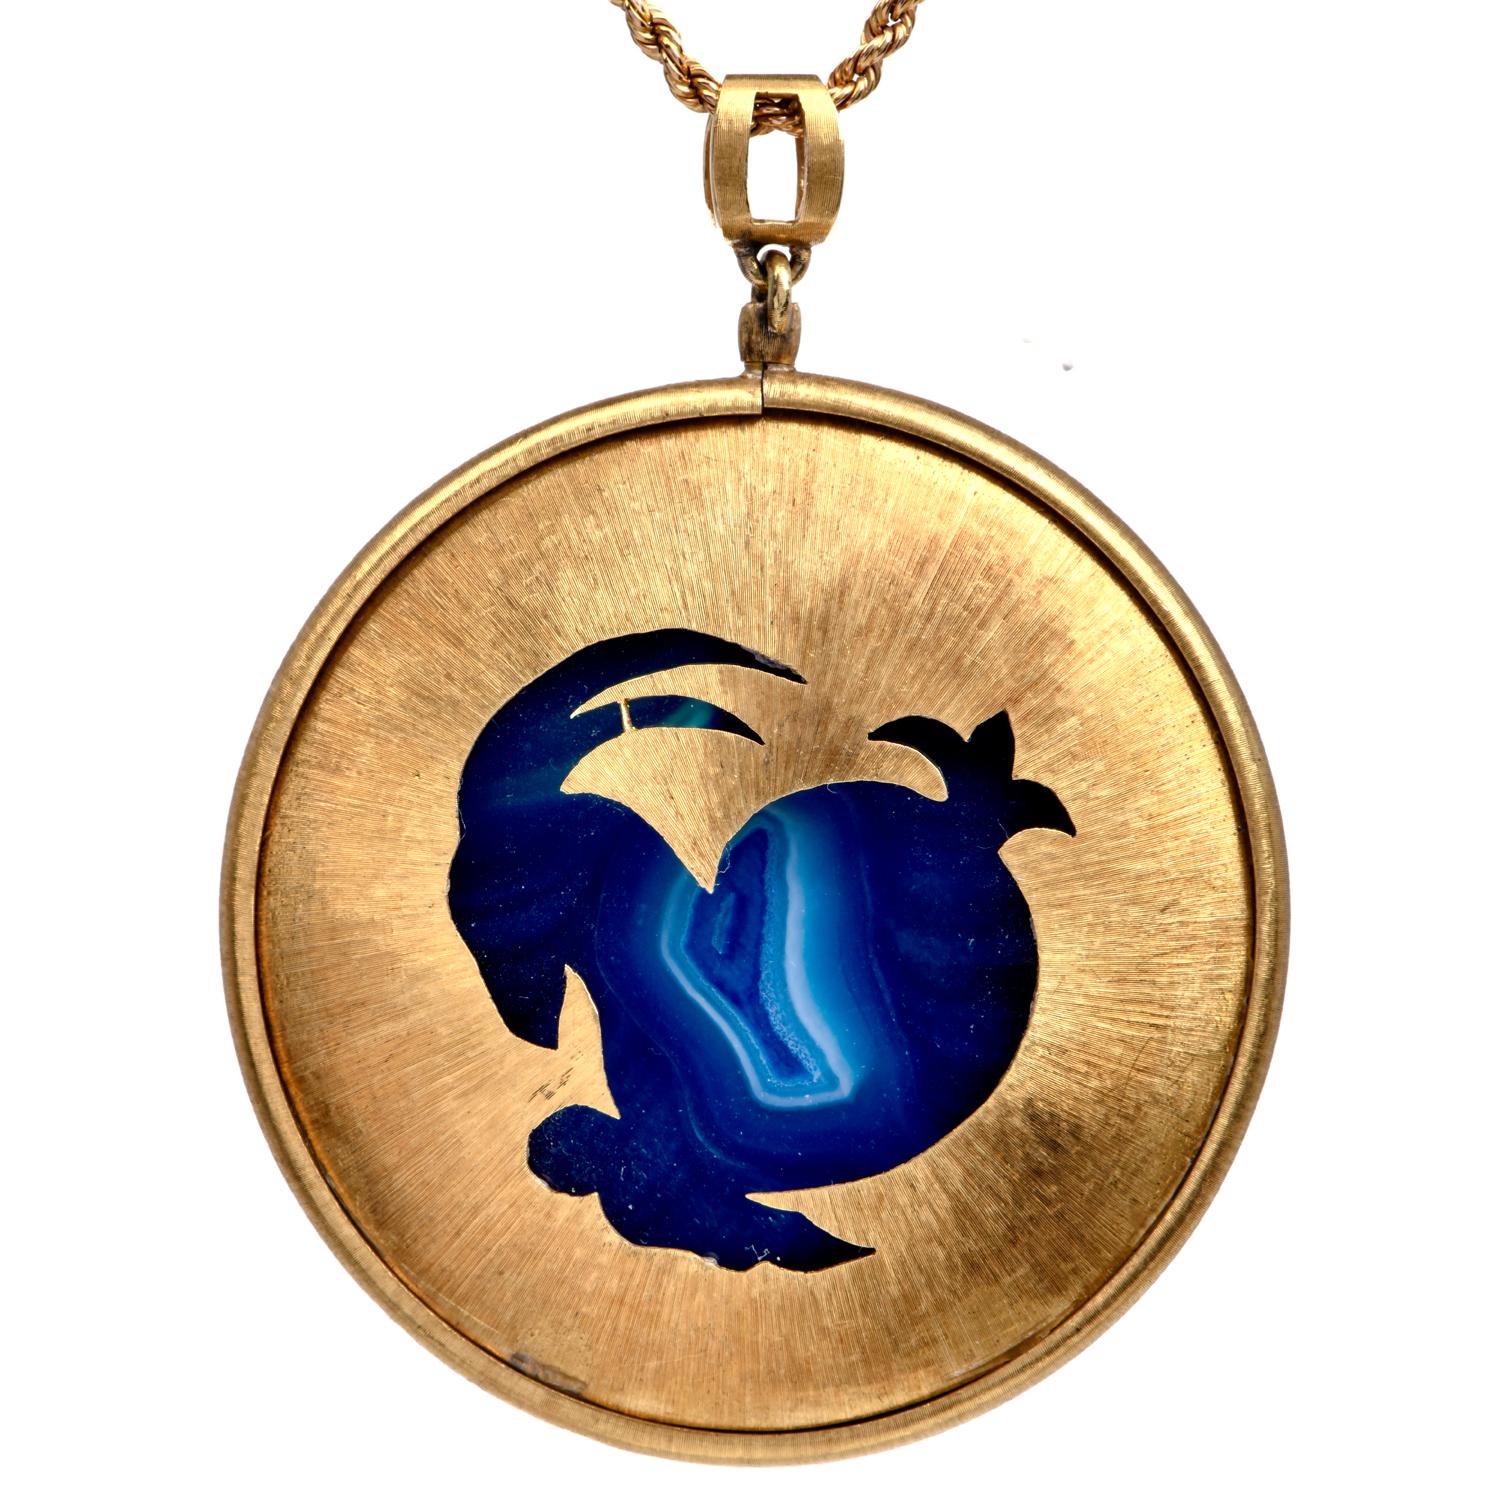 Presenting a captivating Vintage Medallion pendant crafted by the esteemed Buccellati in 18K Italian yellow gold. This pendant features a generously sized blue natural agate nestled within a round frame, characterized by its exquisite silhouette and